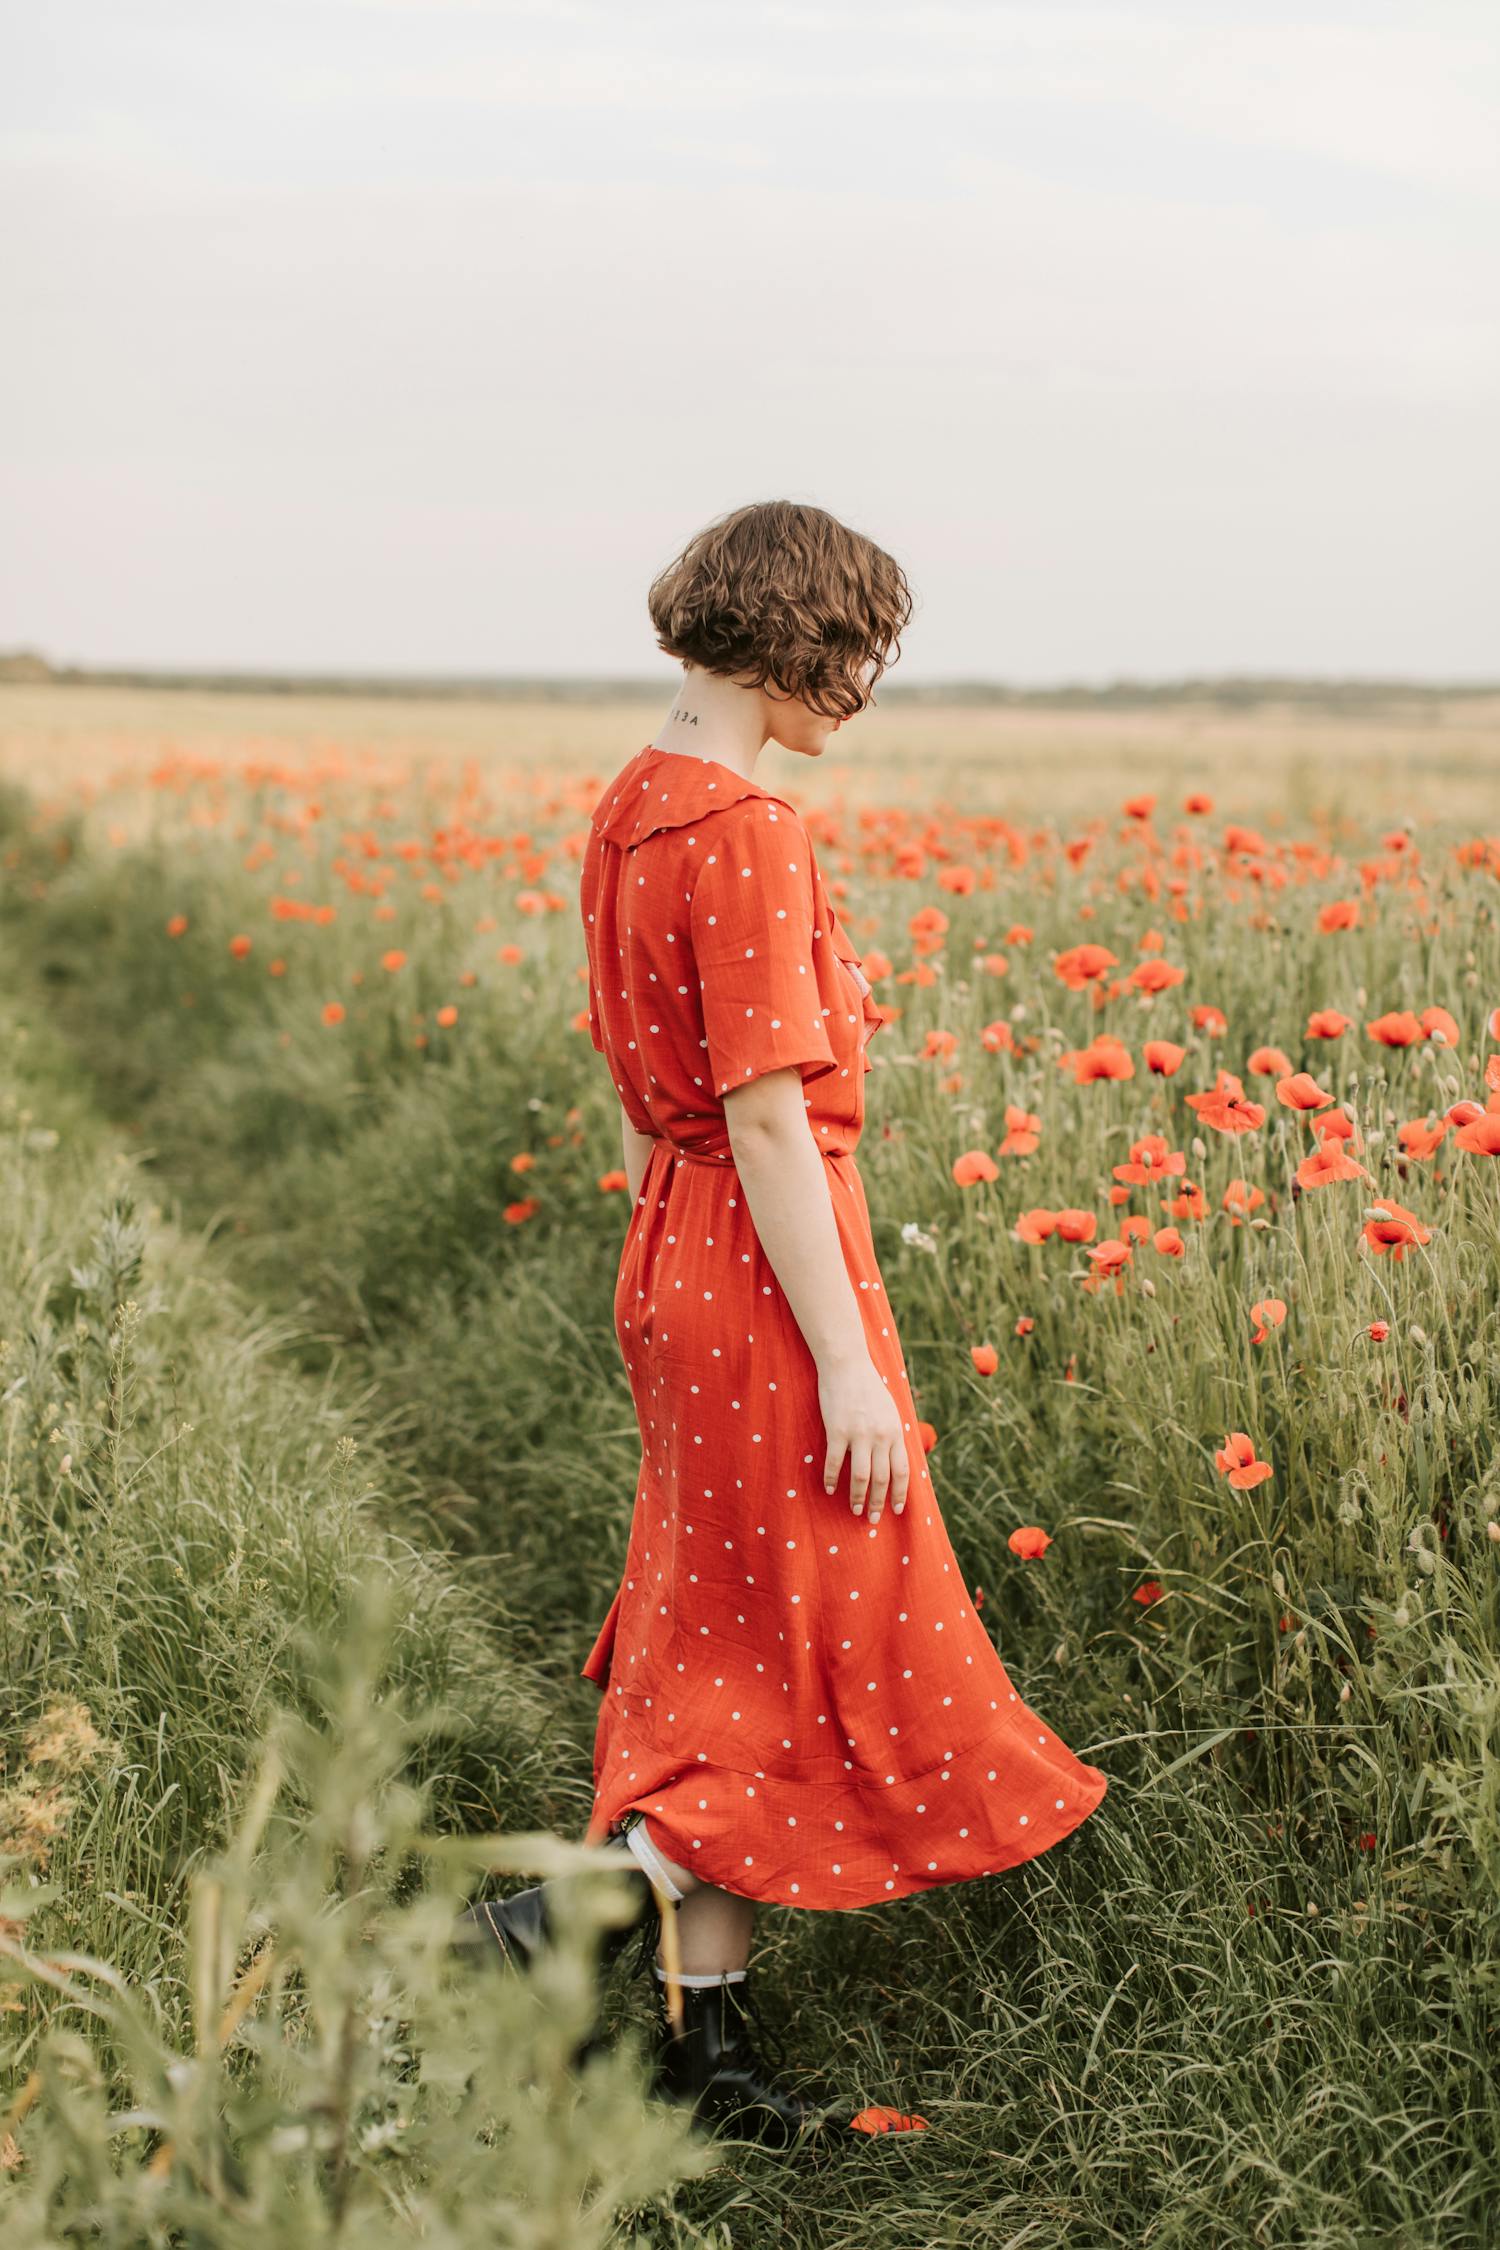 Woman in Red Dress Standing on Green Grass Field · Free Stock Photo